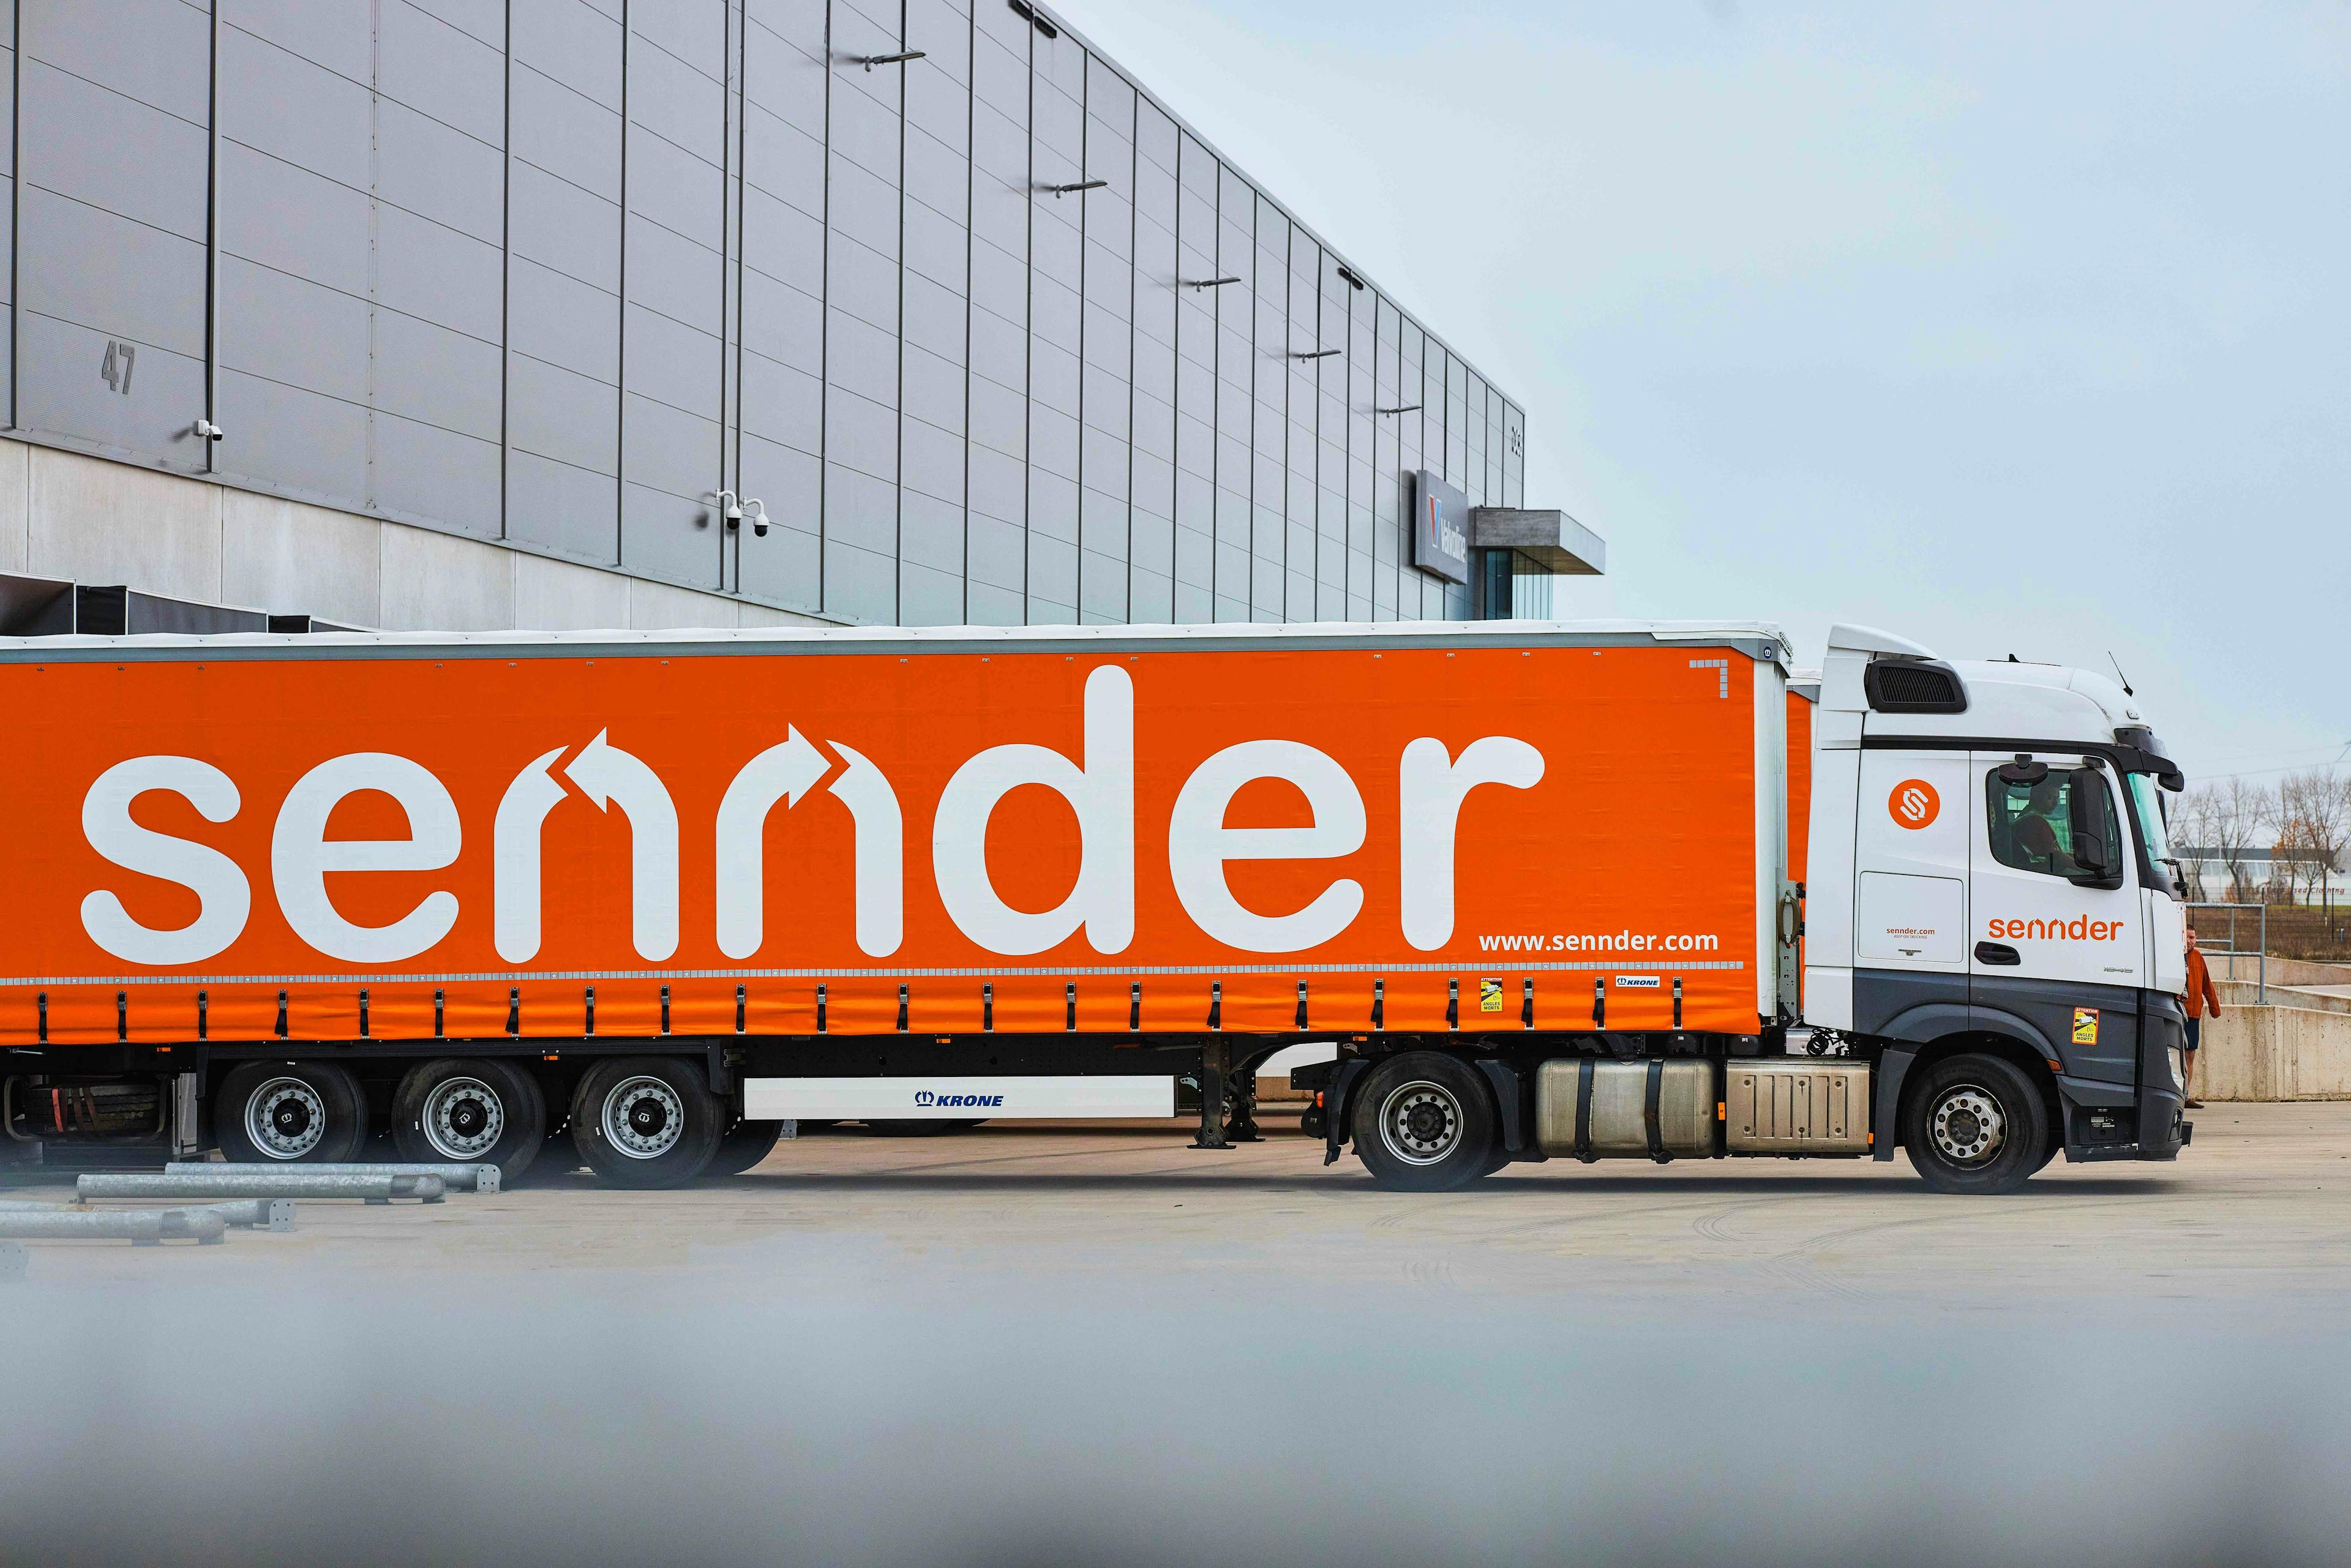 sennder optimizes logistics workflows with Front and integrations